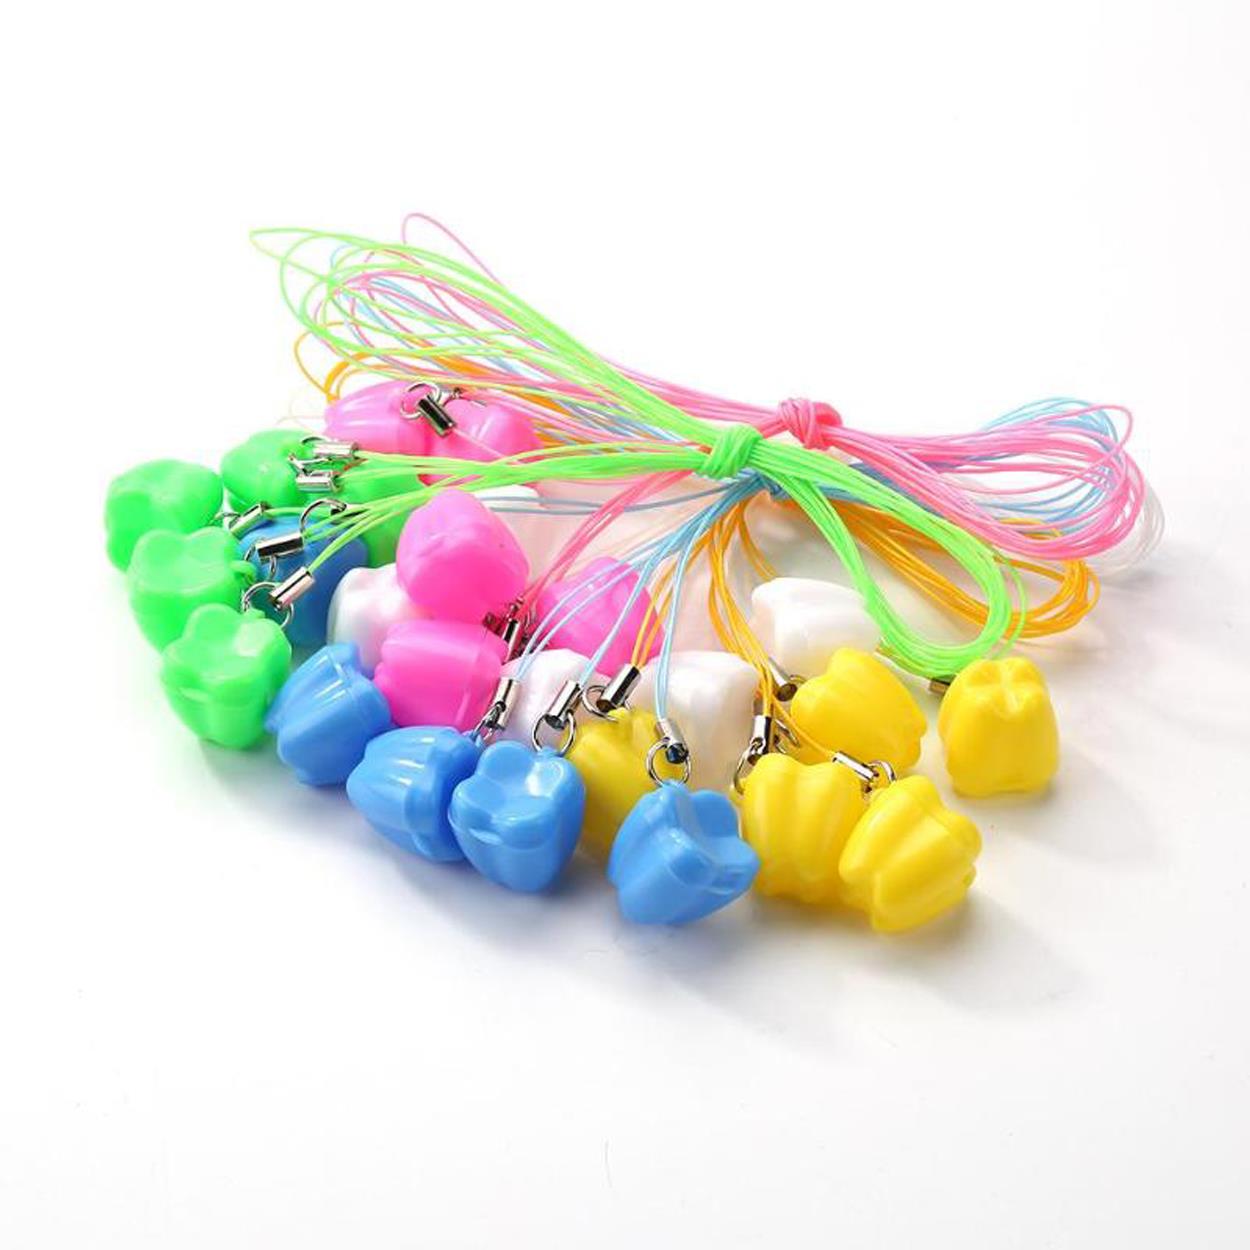 Teething box for babies and children - 50 pcs